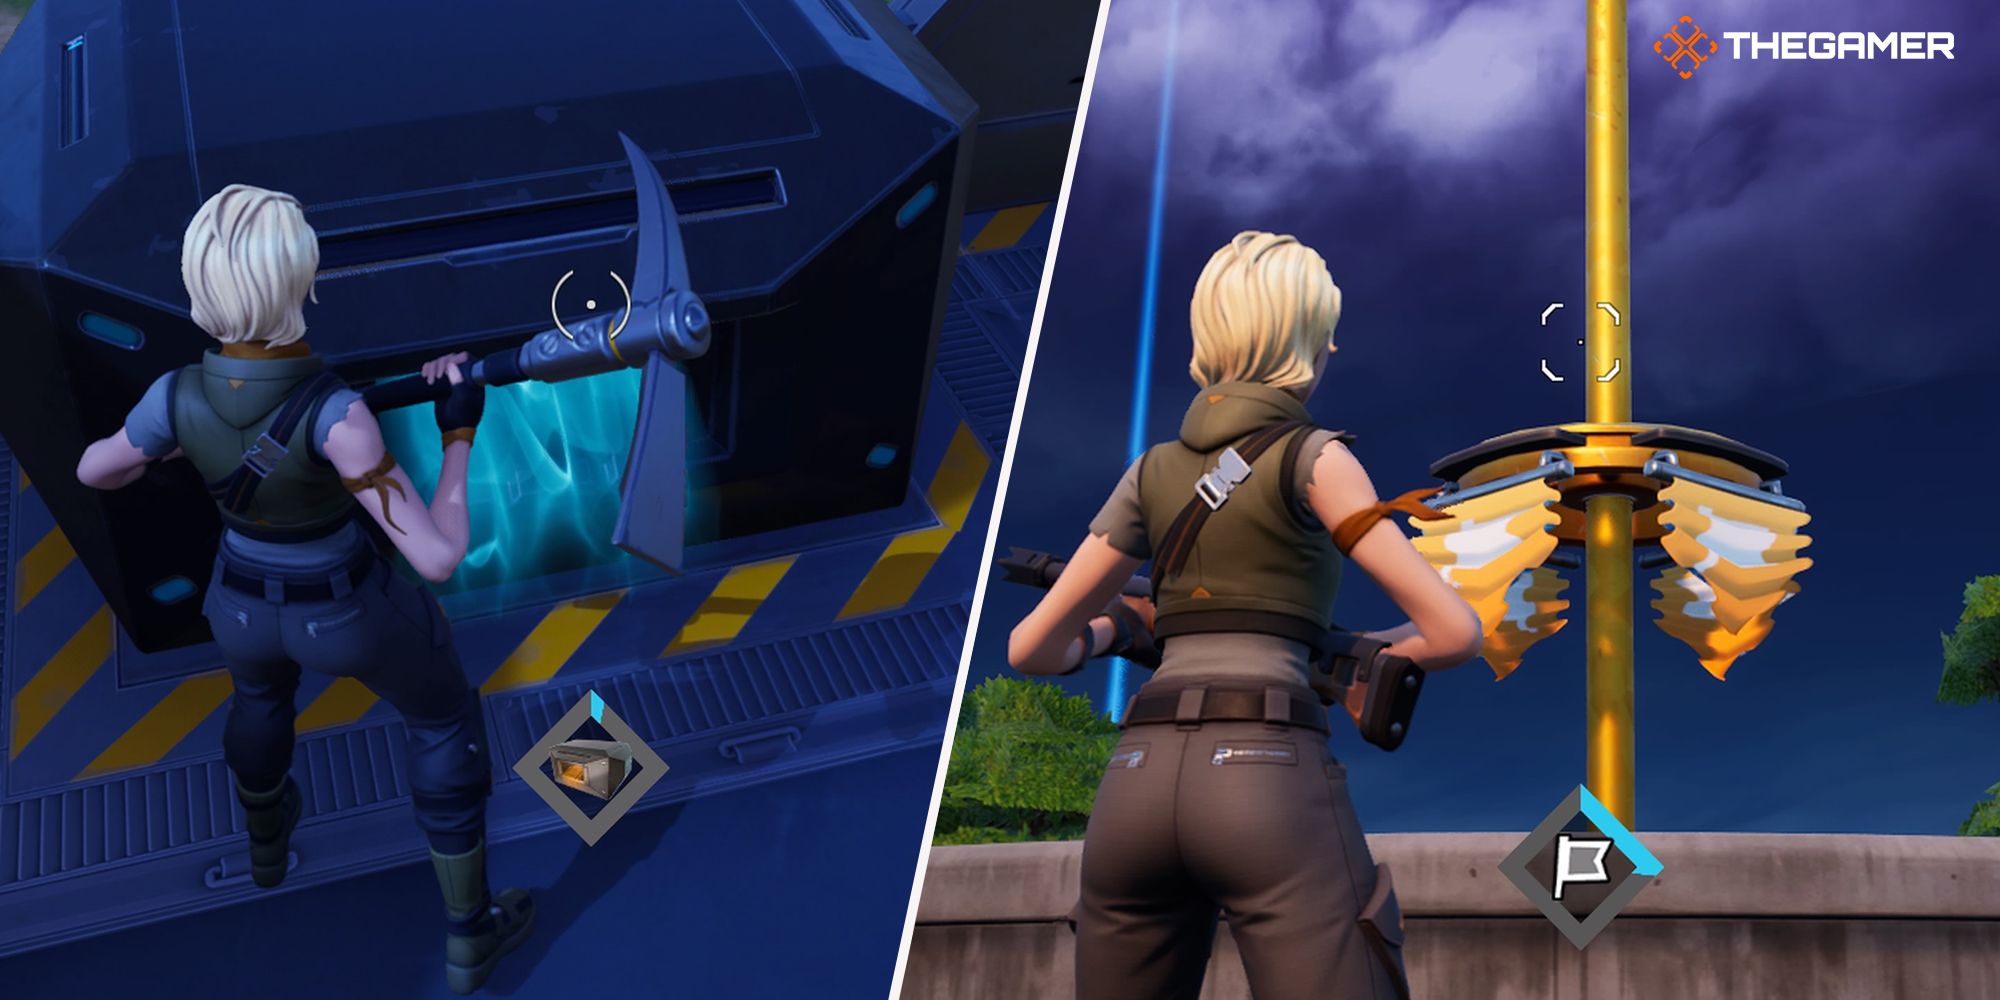 A split image of a player beside a chest and a capture point in Fortnite.